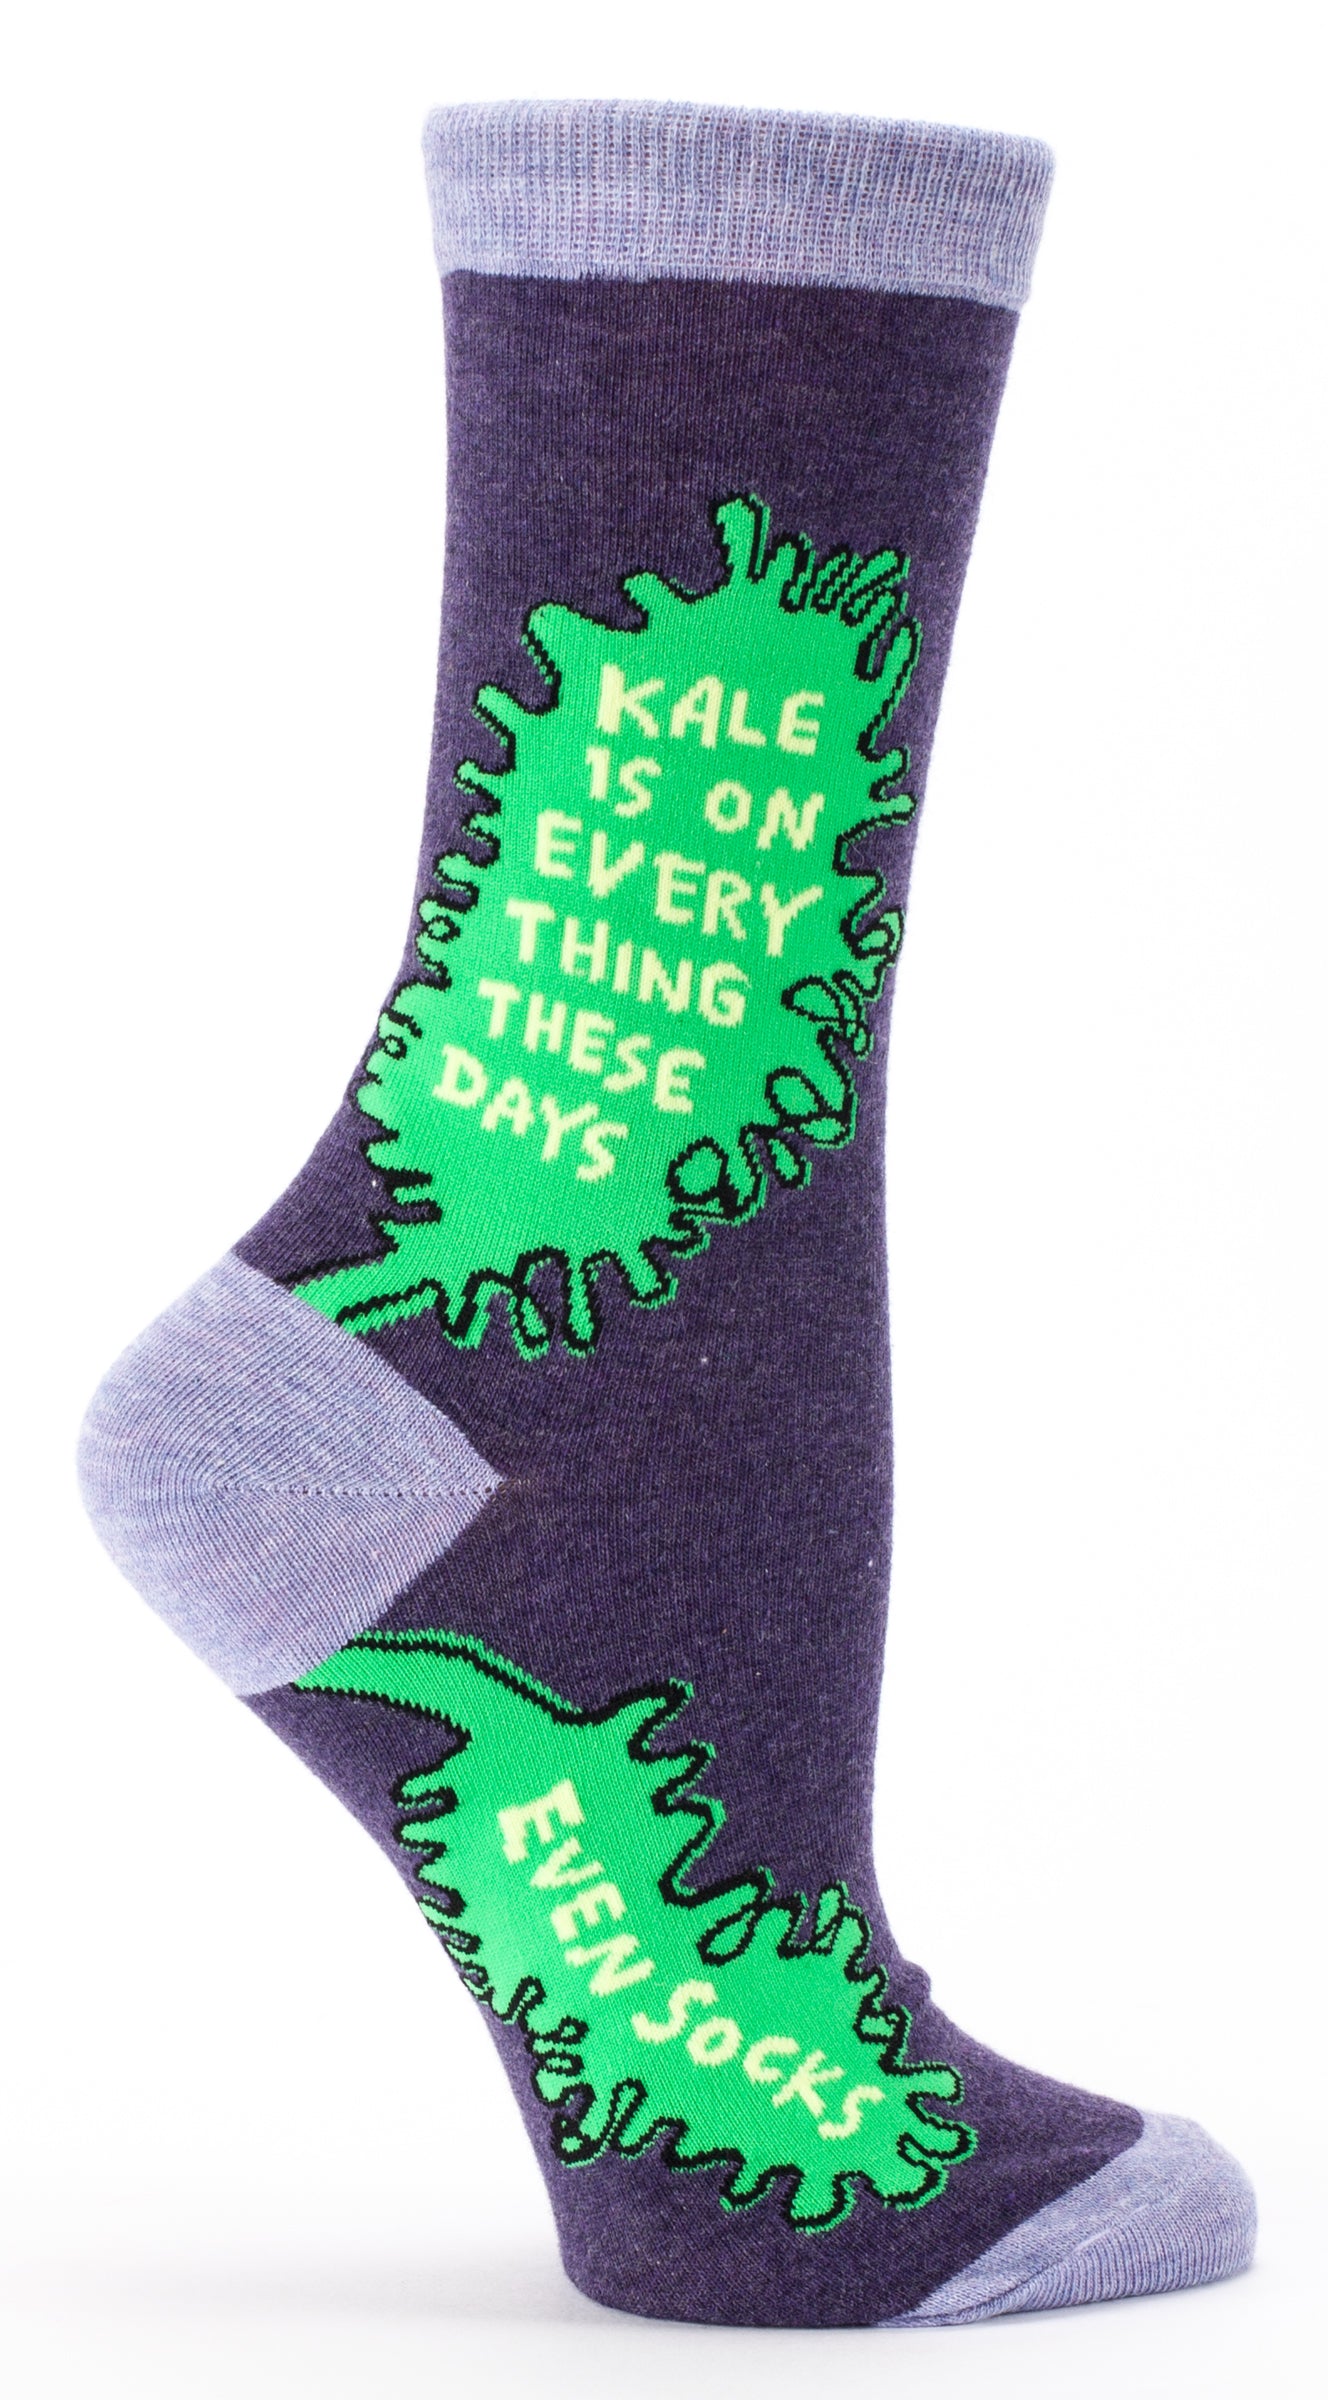 Woman's novelty fun crew sock with legend: "Kale Is On Everything...Even Socks"